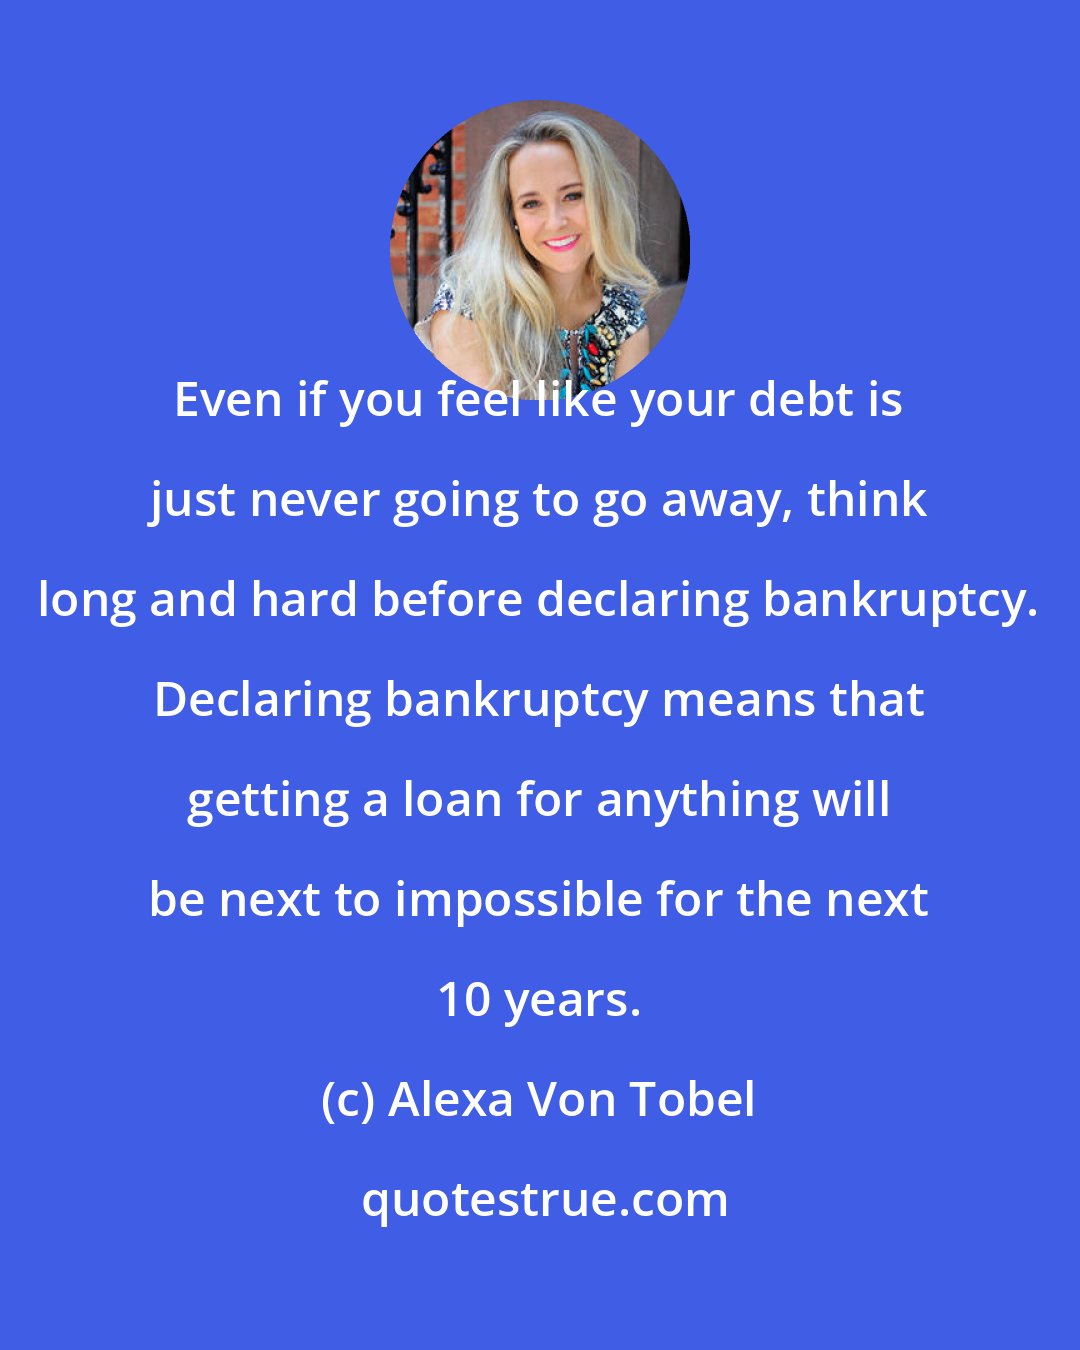 Alexa Von Tobel: Even if you feel like your debt is just never going to go away, think long and hard before declaring bankruptcy. Declaring bankruptcy means that getting a loan for anything will be next to impossible for the next 10 years.